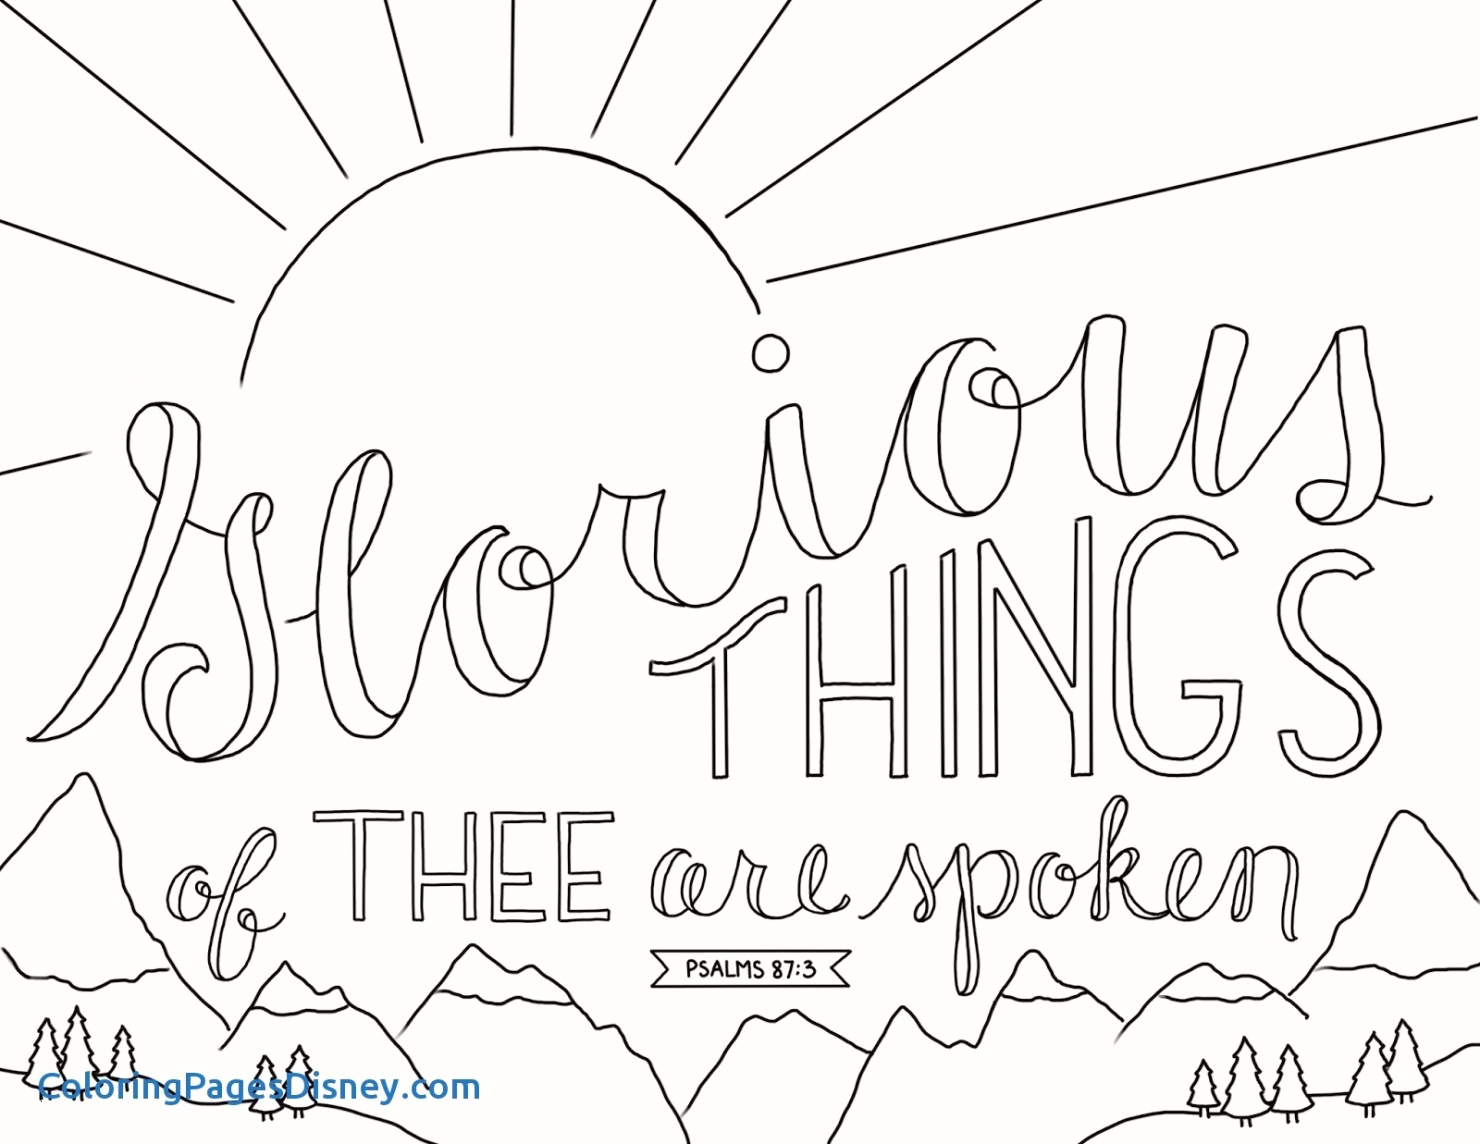 Coloring Book : Free Printable Quoteloring Pages For Adults To ...